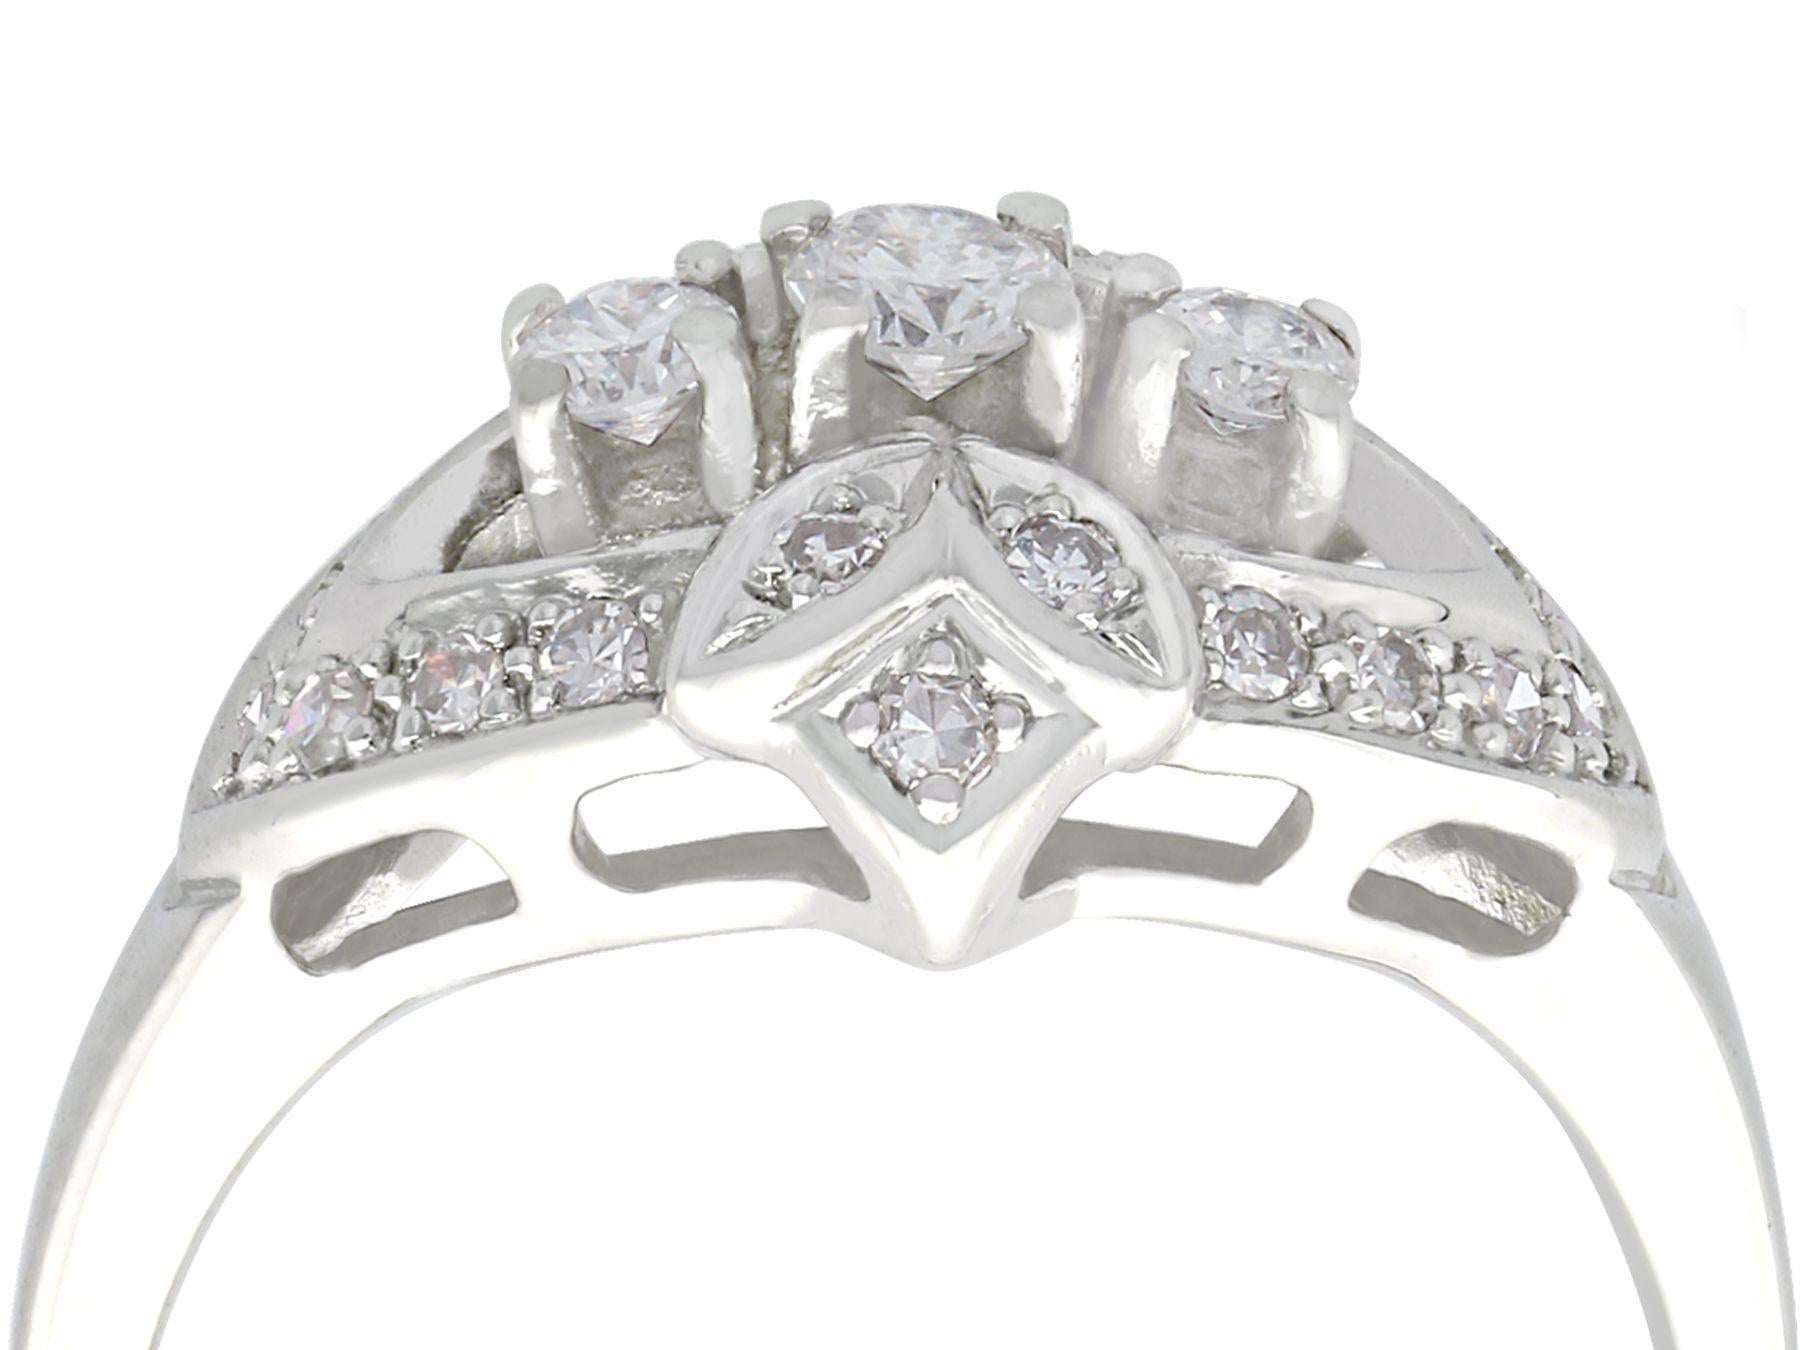 An impressive vintage 1950s 0.50 carat diamond and 14 karat white gold cocktail ring; part of our diverse diamond jewelry and estate jewelry collections.

This fine and impressive diamond cocktail ring has been crafted in 14k white gold.

The